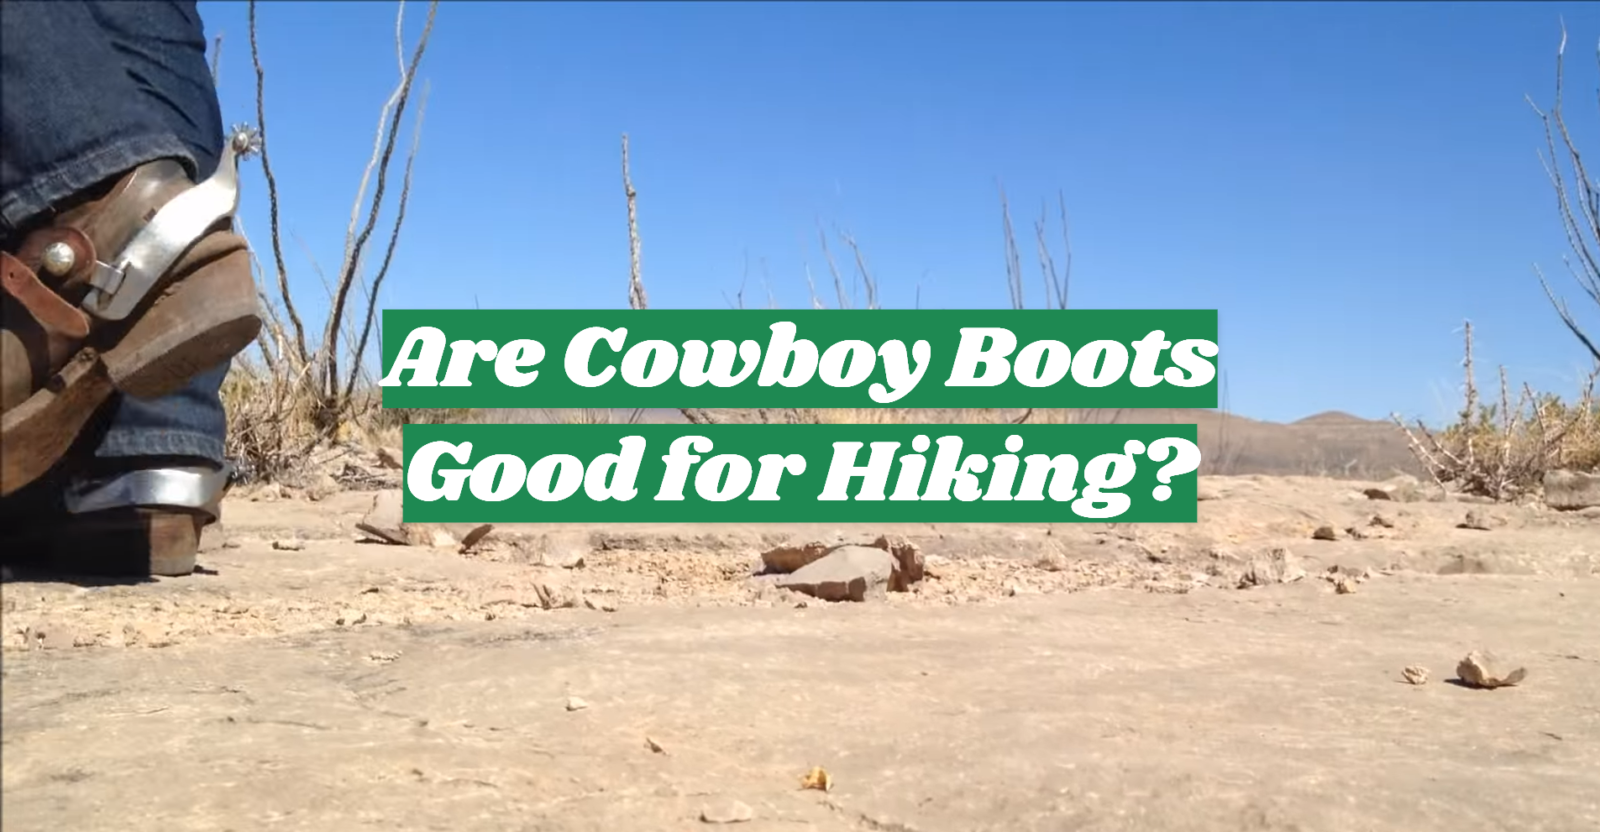 Are Cowboy Boots Good for Hiking?